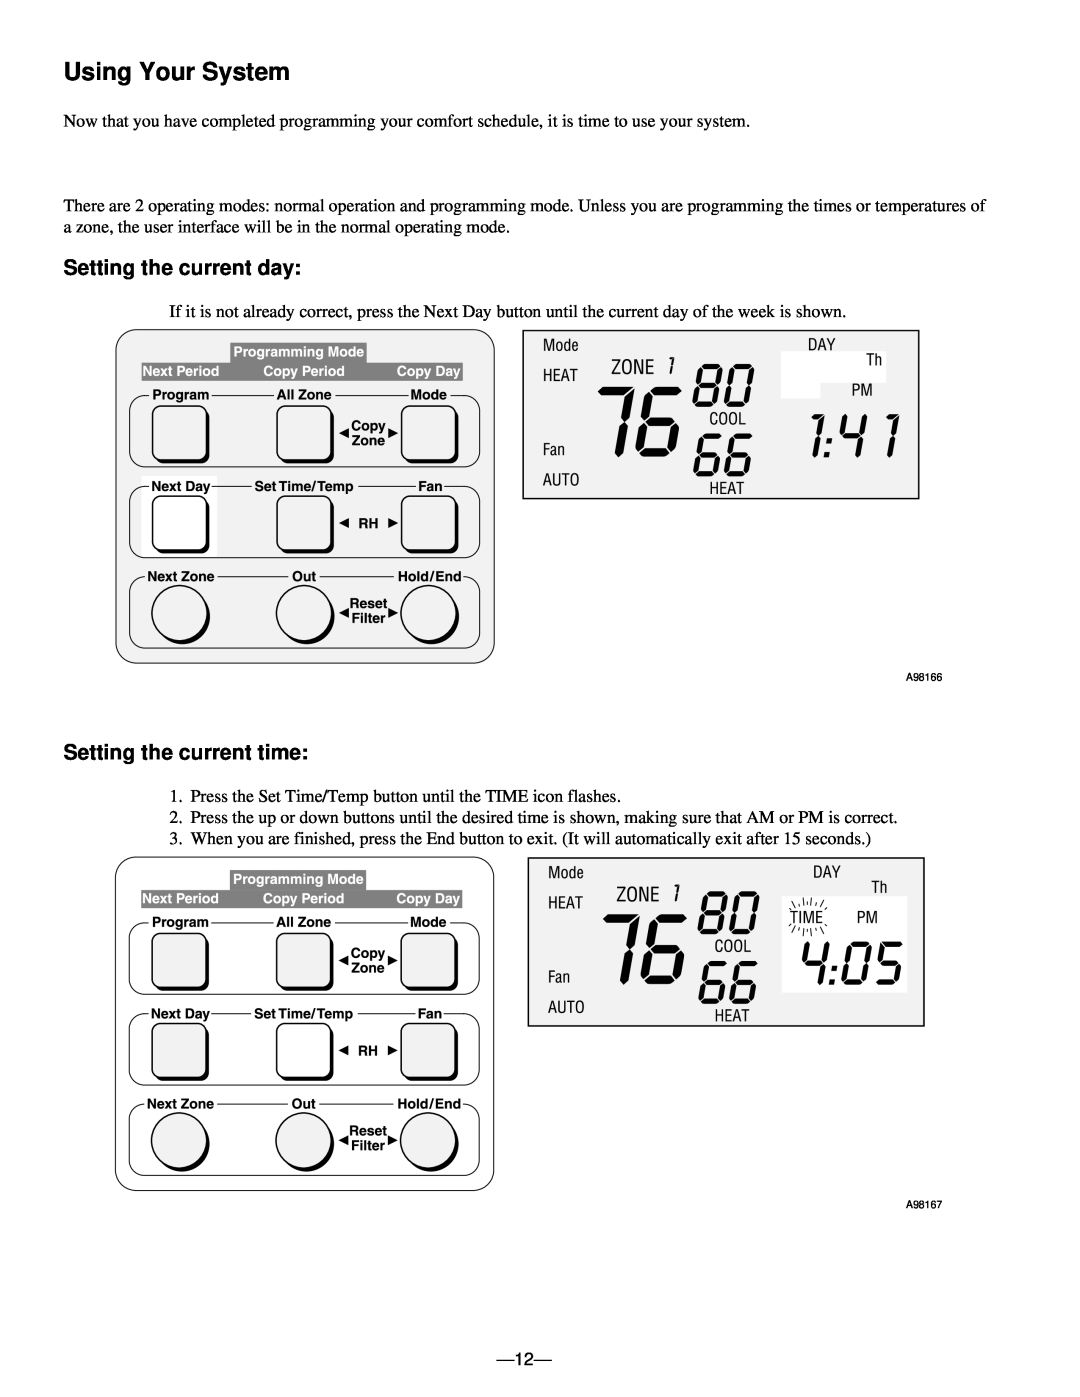 Bryant A96447 manual Using Your System, Setting the current day, Setting the current time 